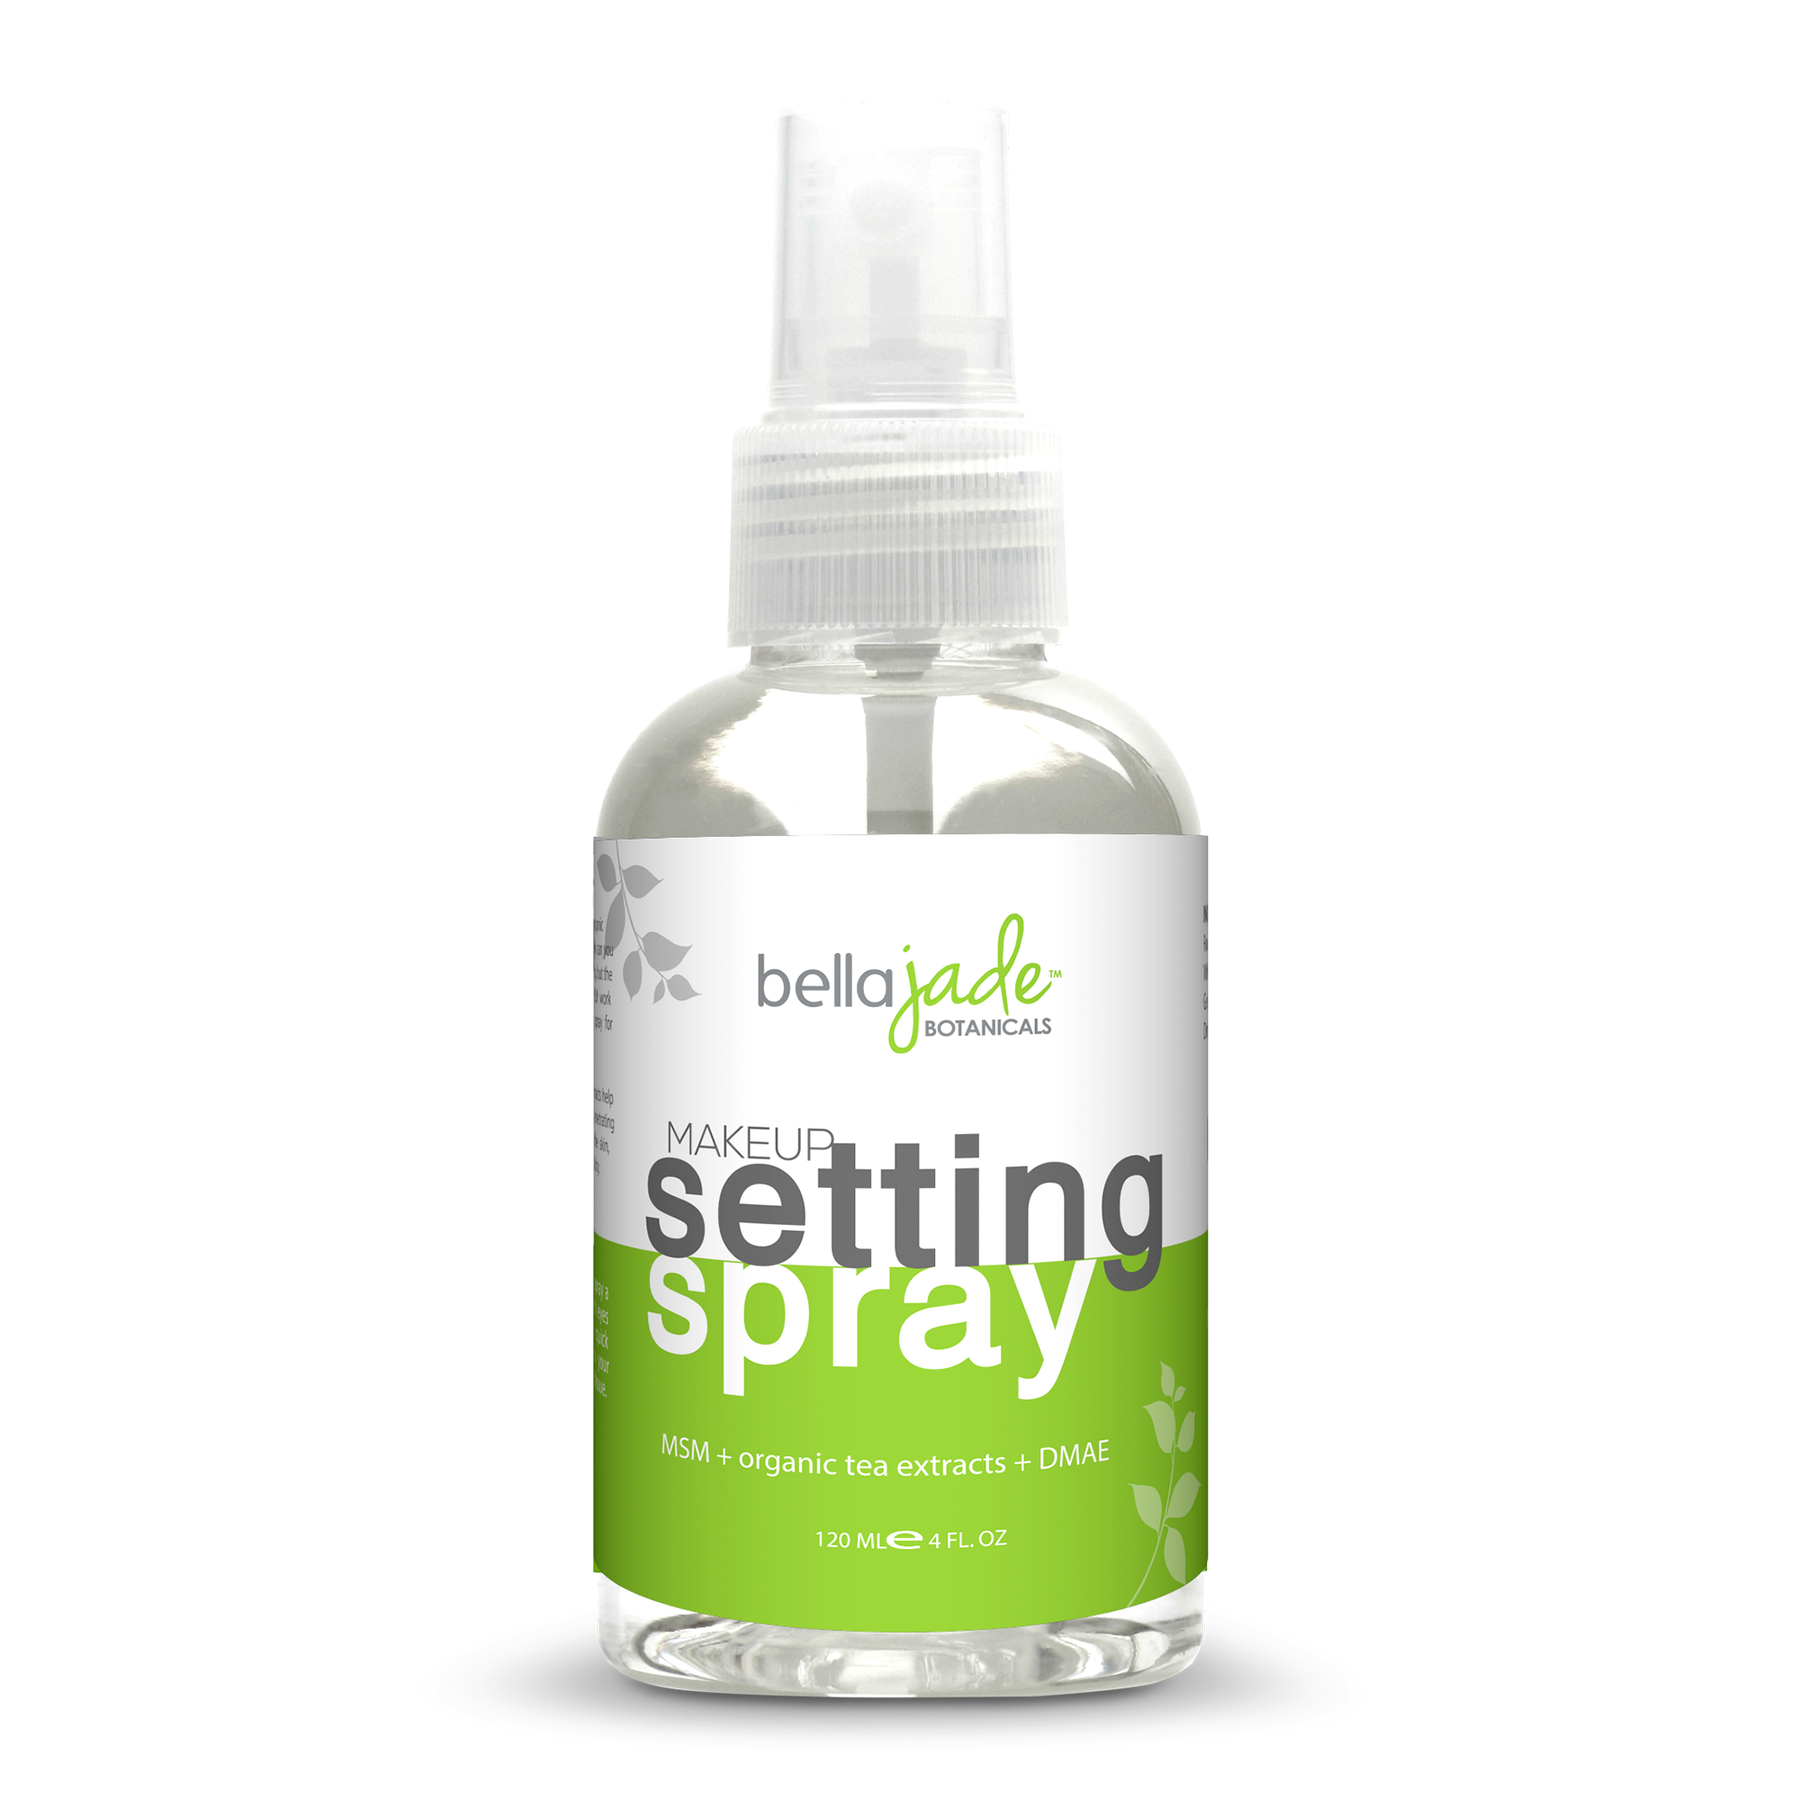 Makeup Setting Spray with Organic Green Tea MSM and DMAE - A Must for